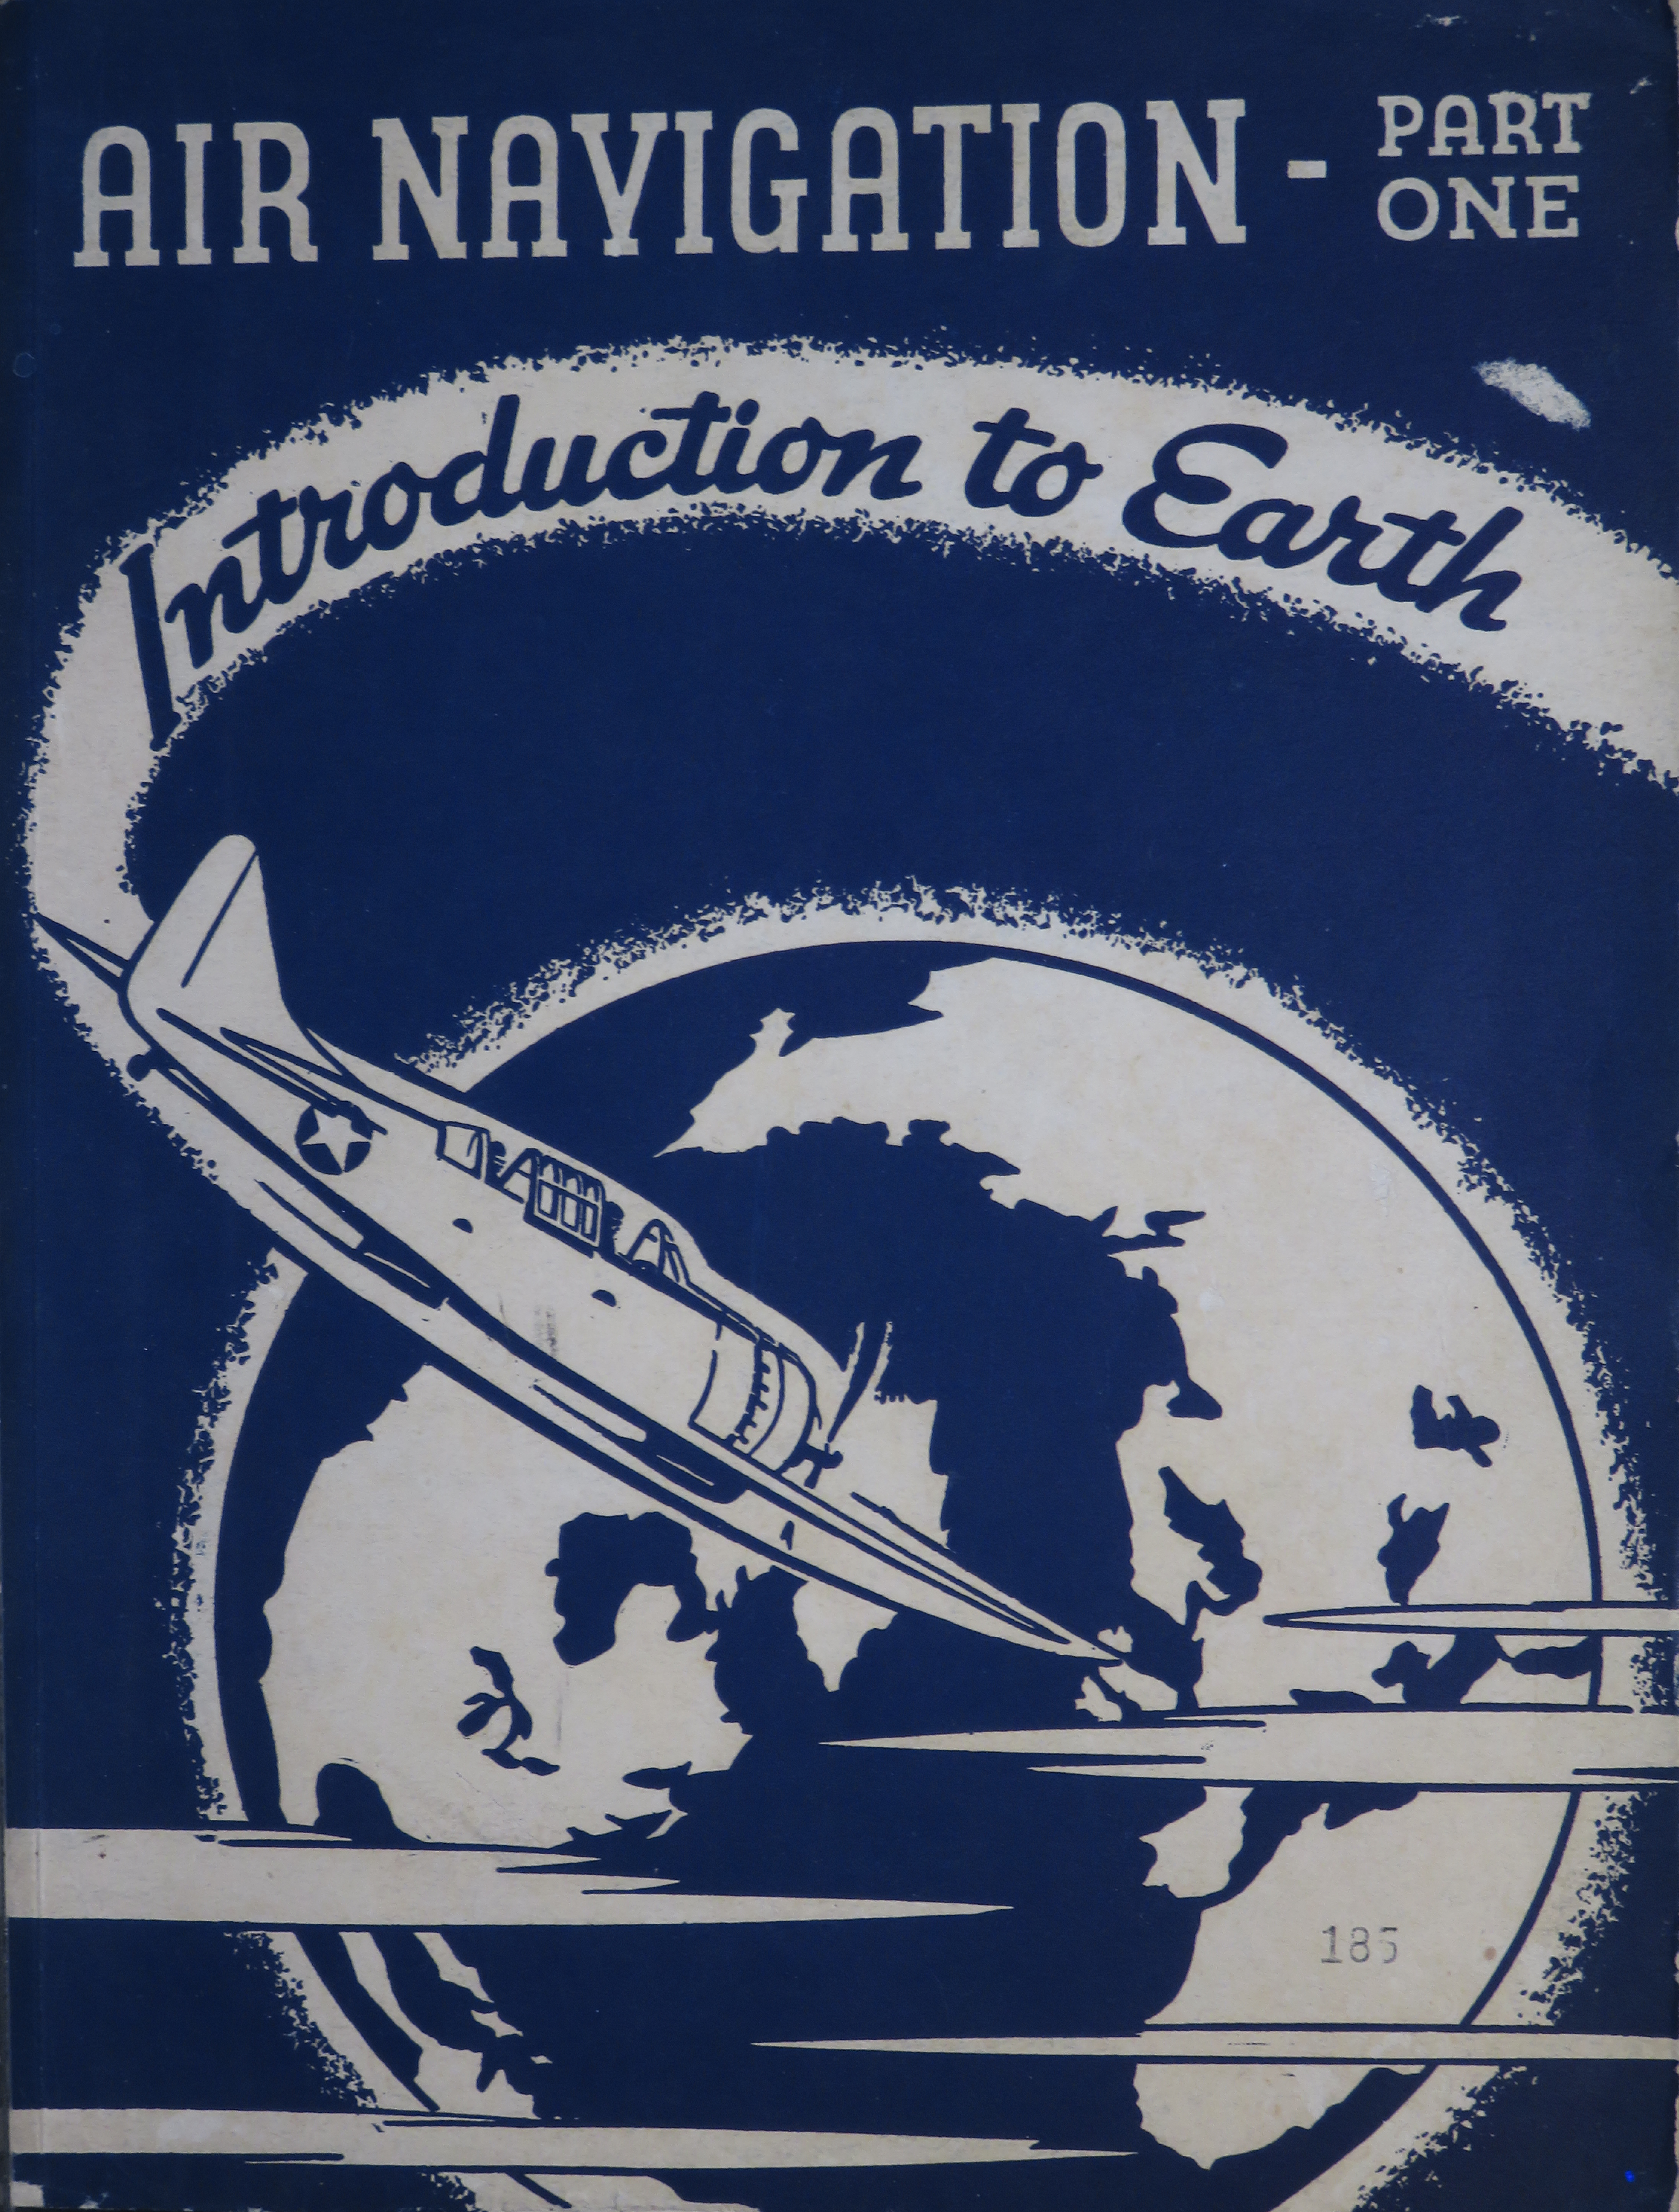 Sample page 1 from AirCorps Library document: Air Navigation Part one: Introduction to Earth